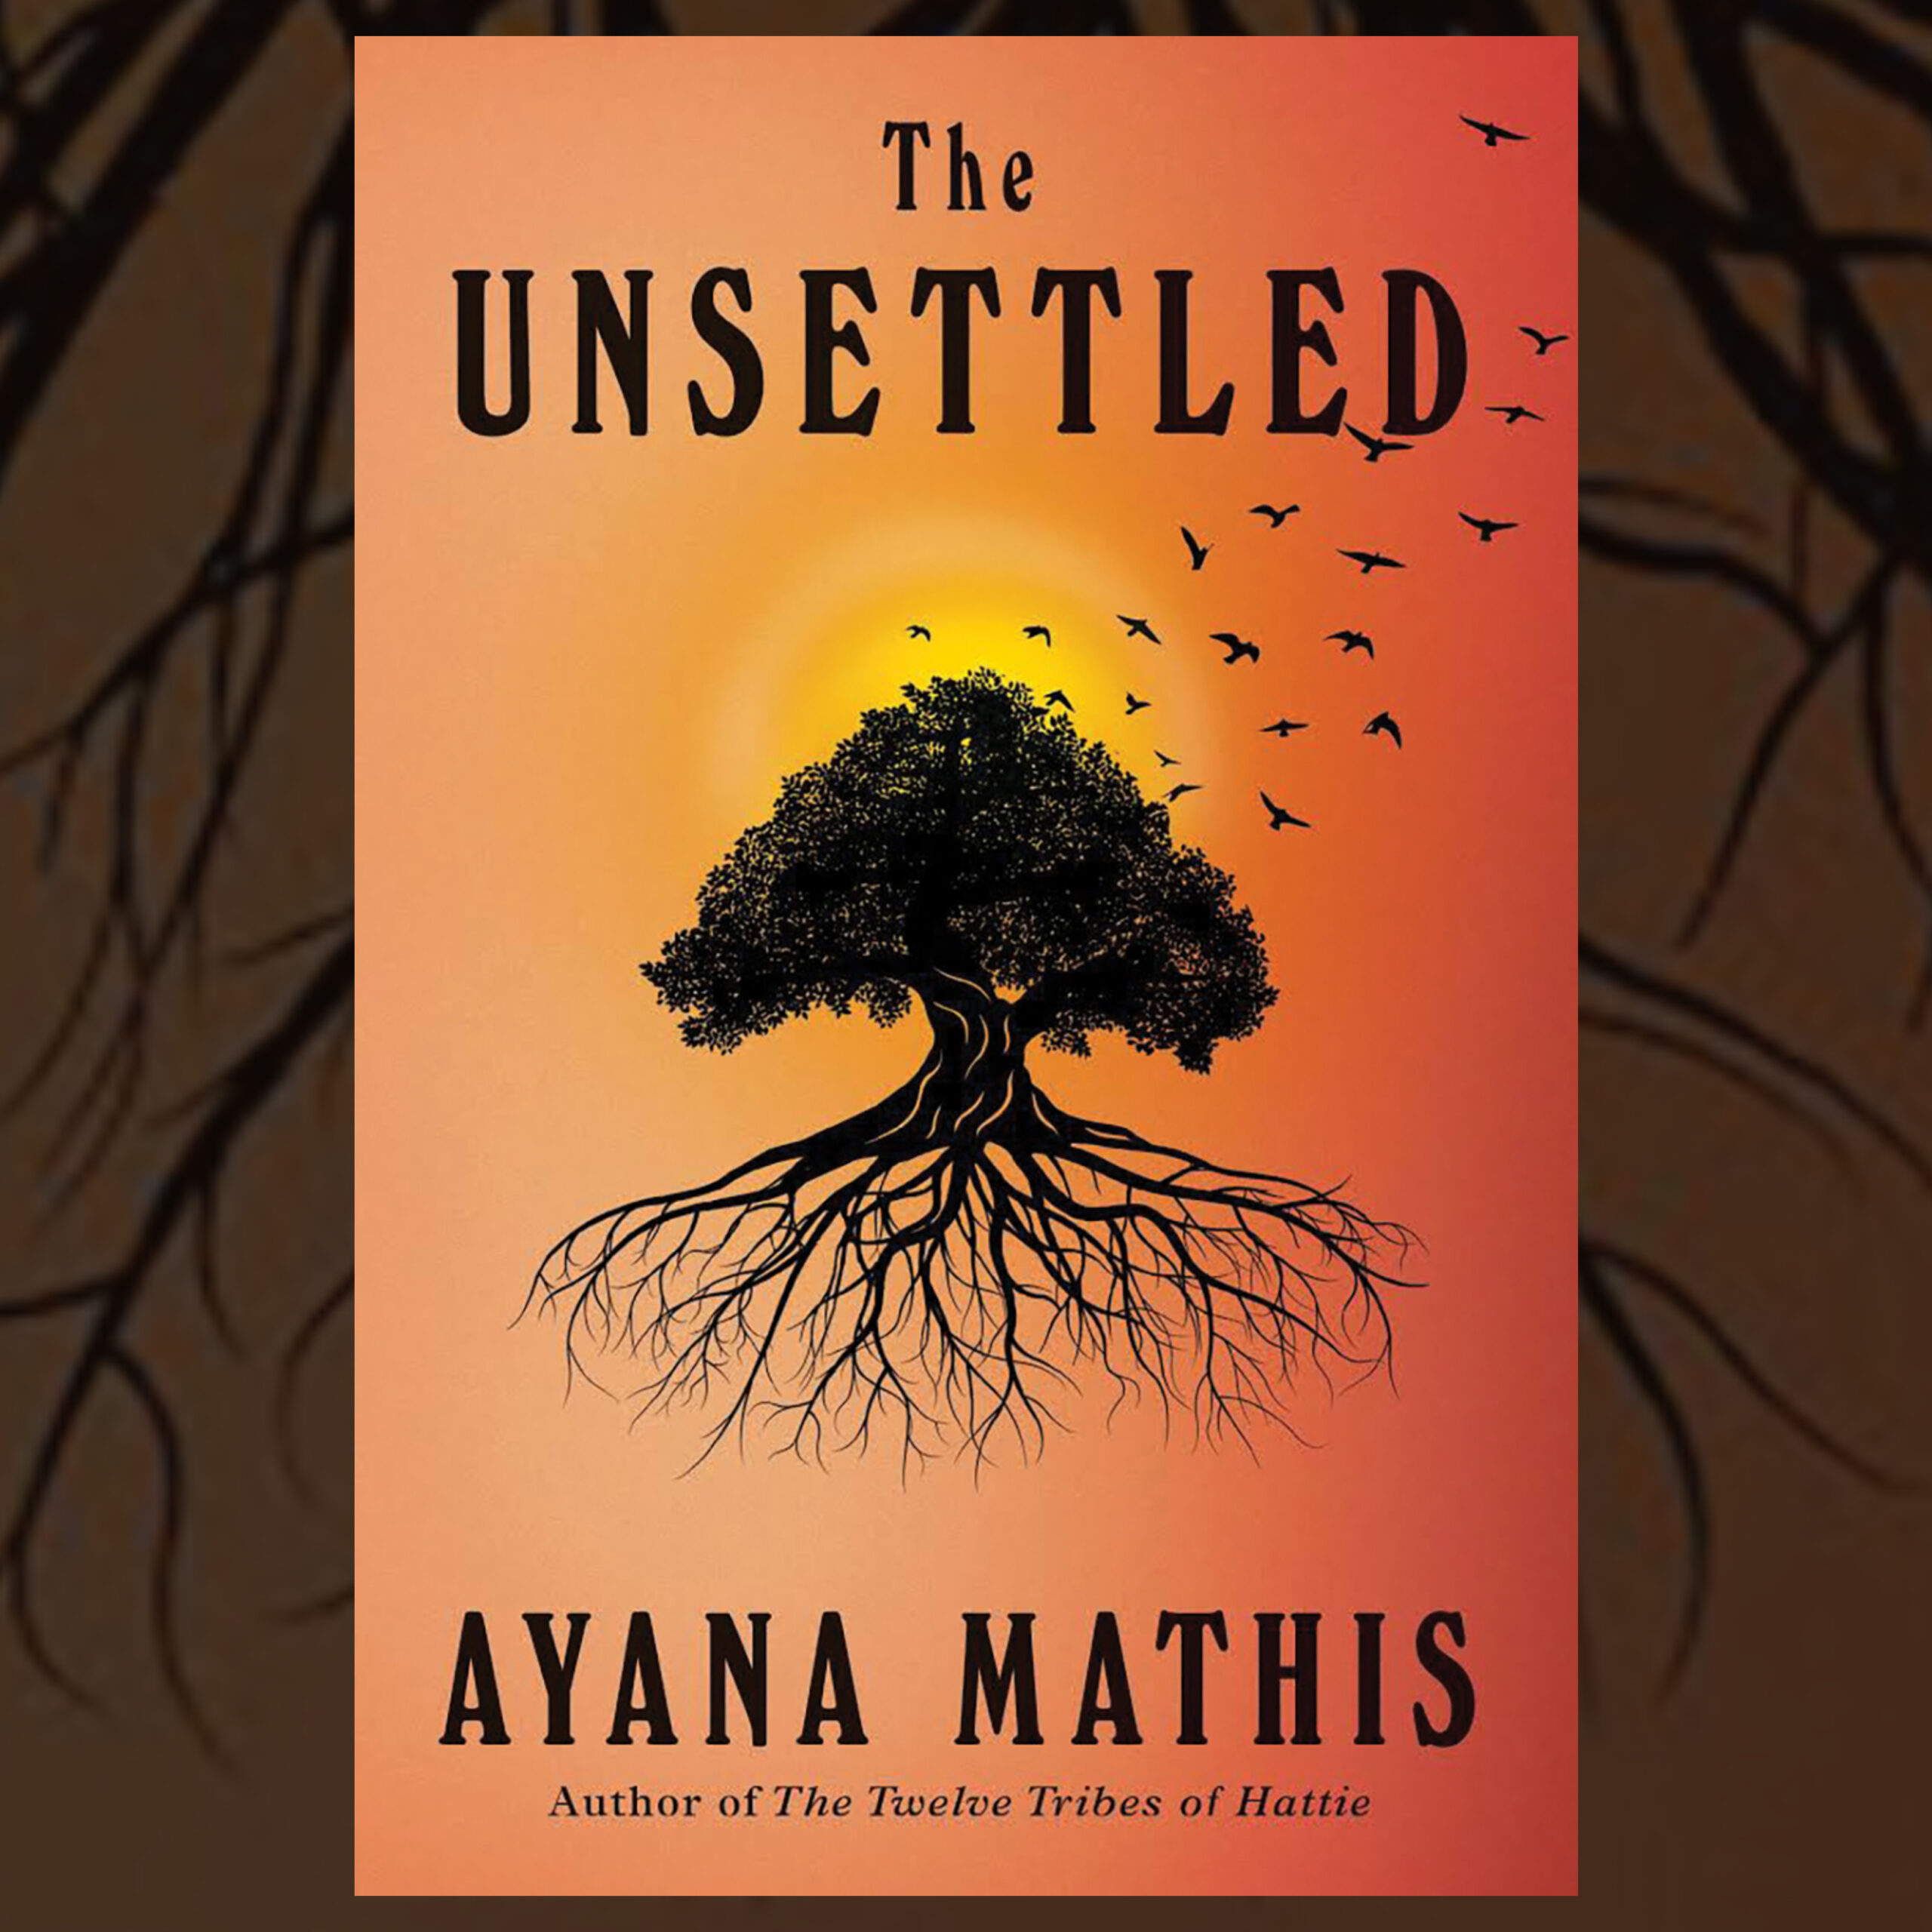 The Book Show - Ayana Mathis - The Unsettled